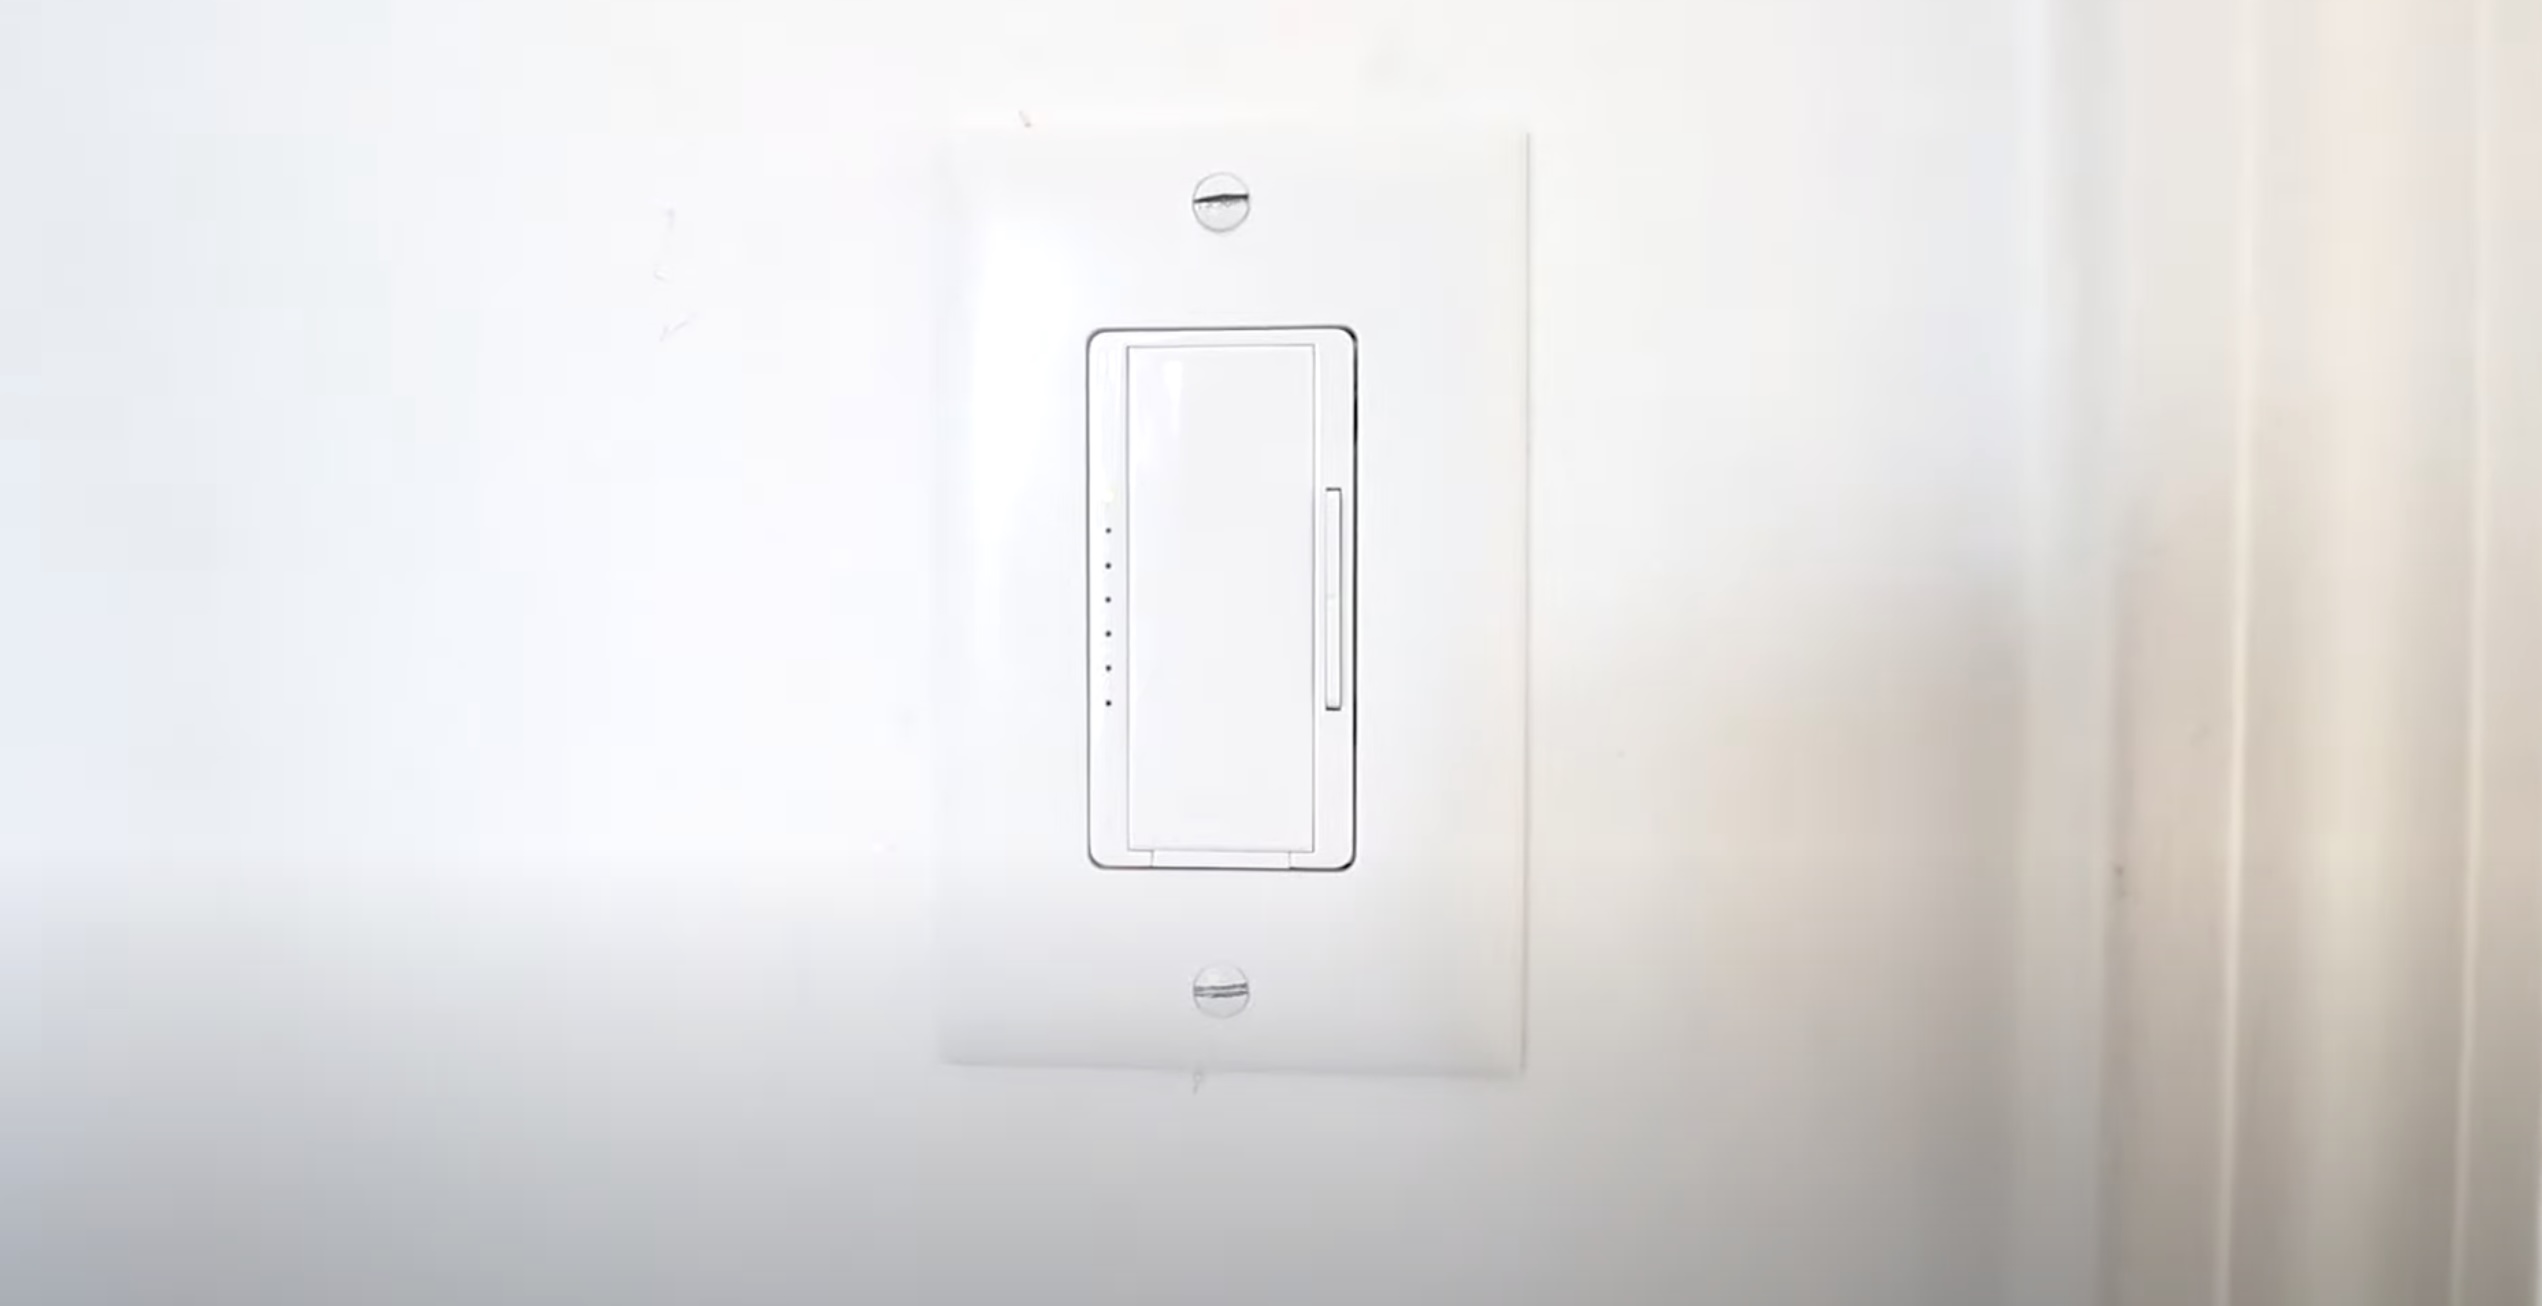 How To Program A Dimmer Switch